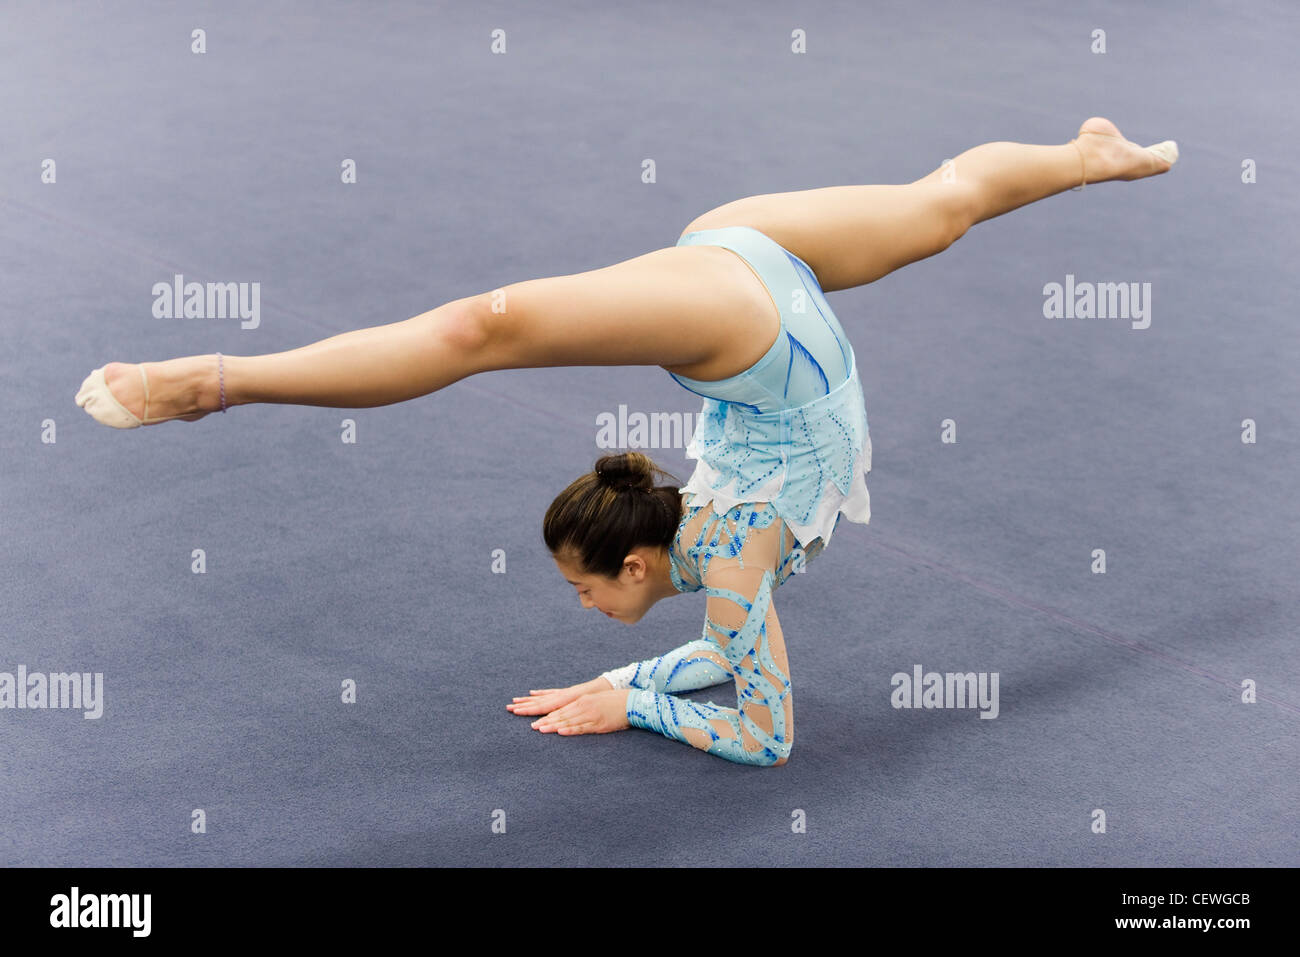 Female gymnast performing elbow stand Stock Photo